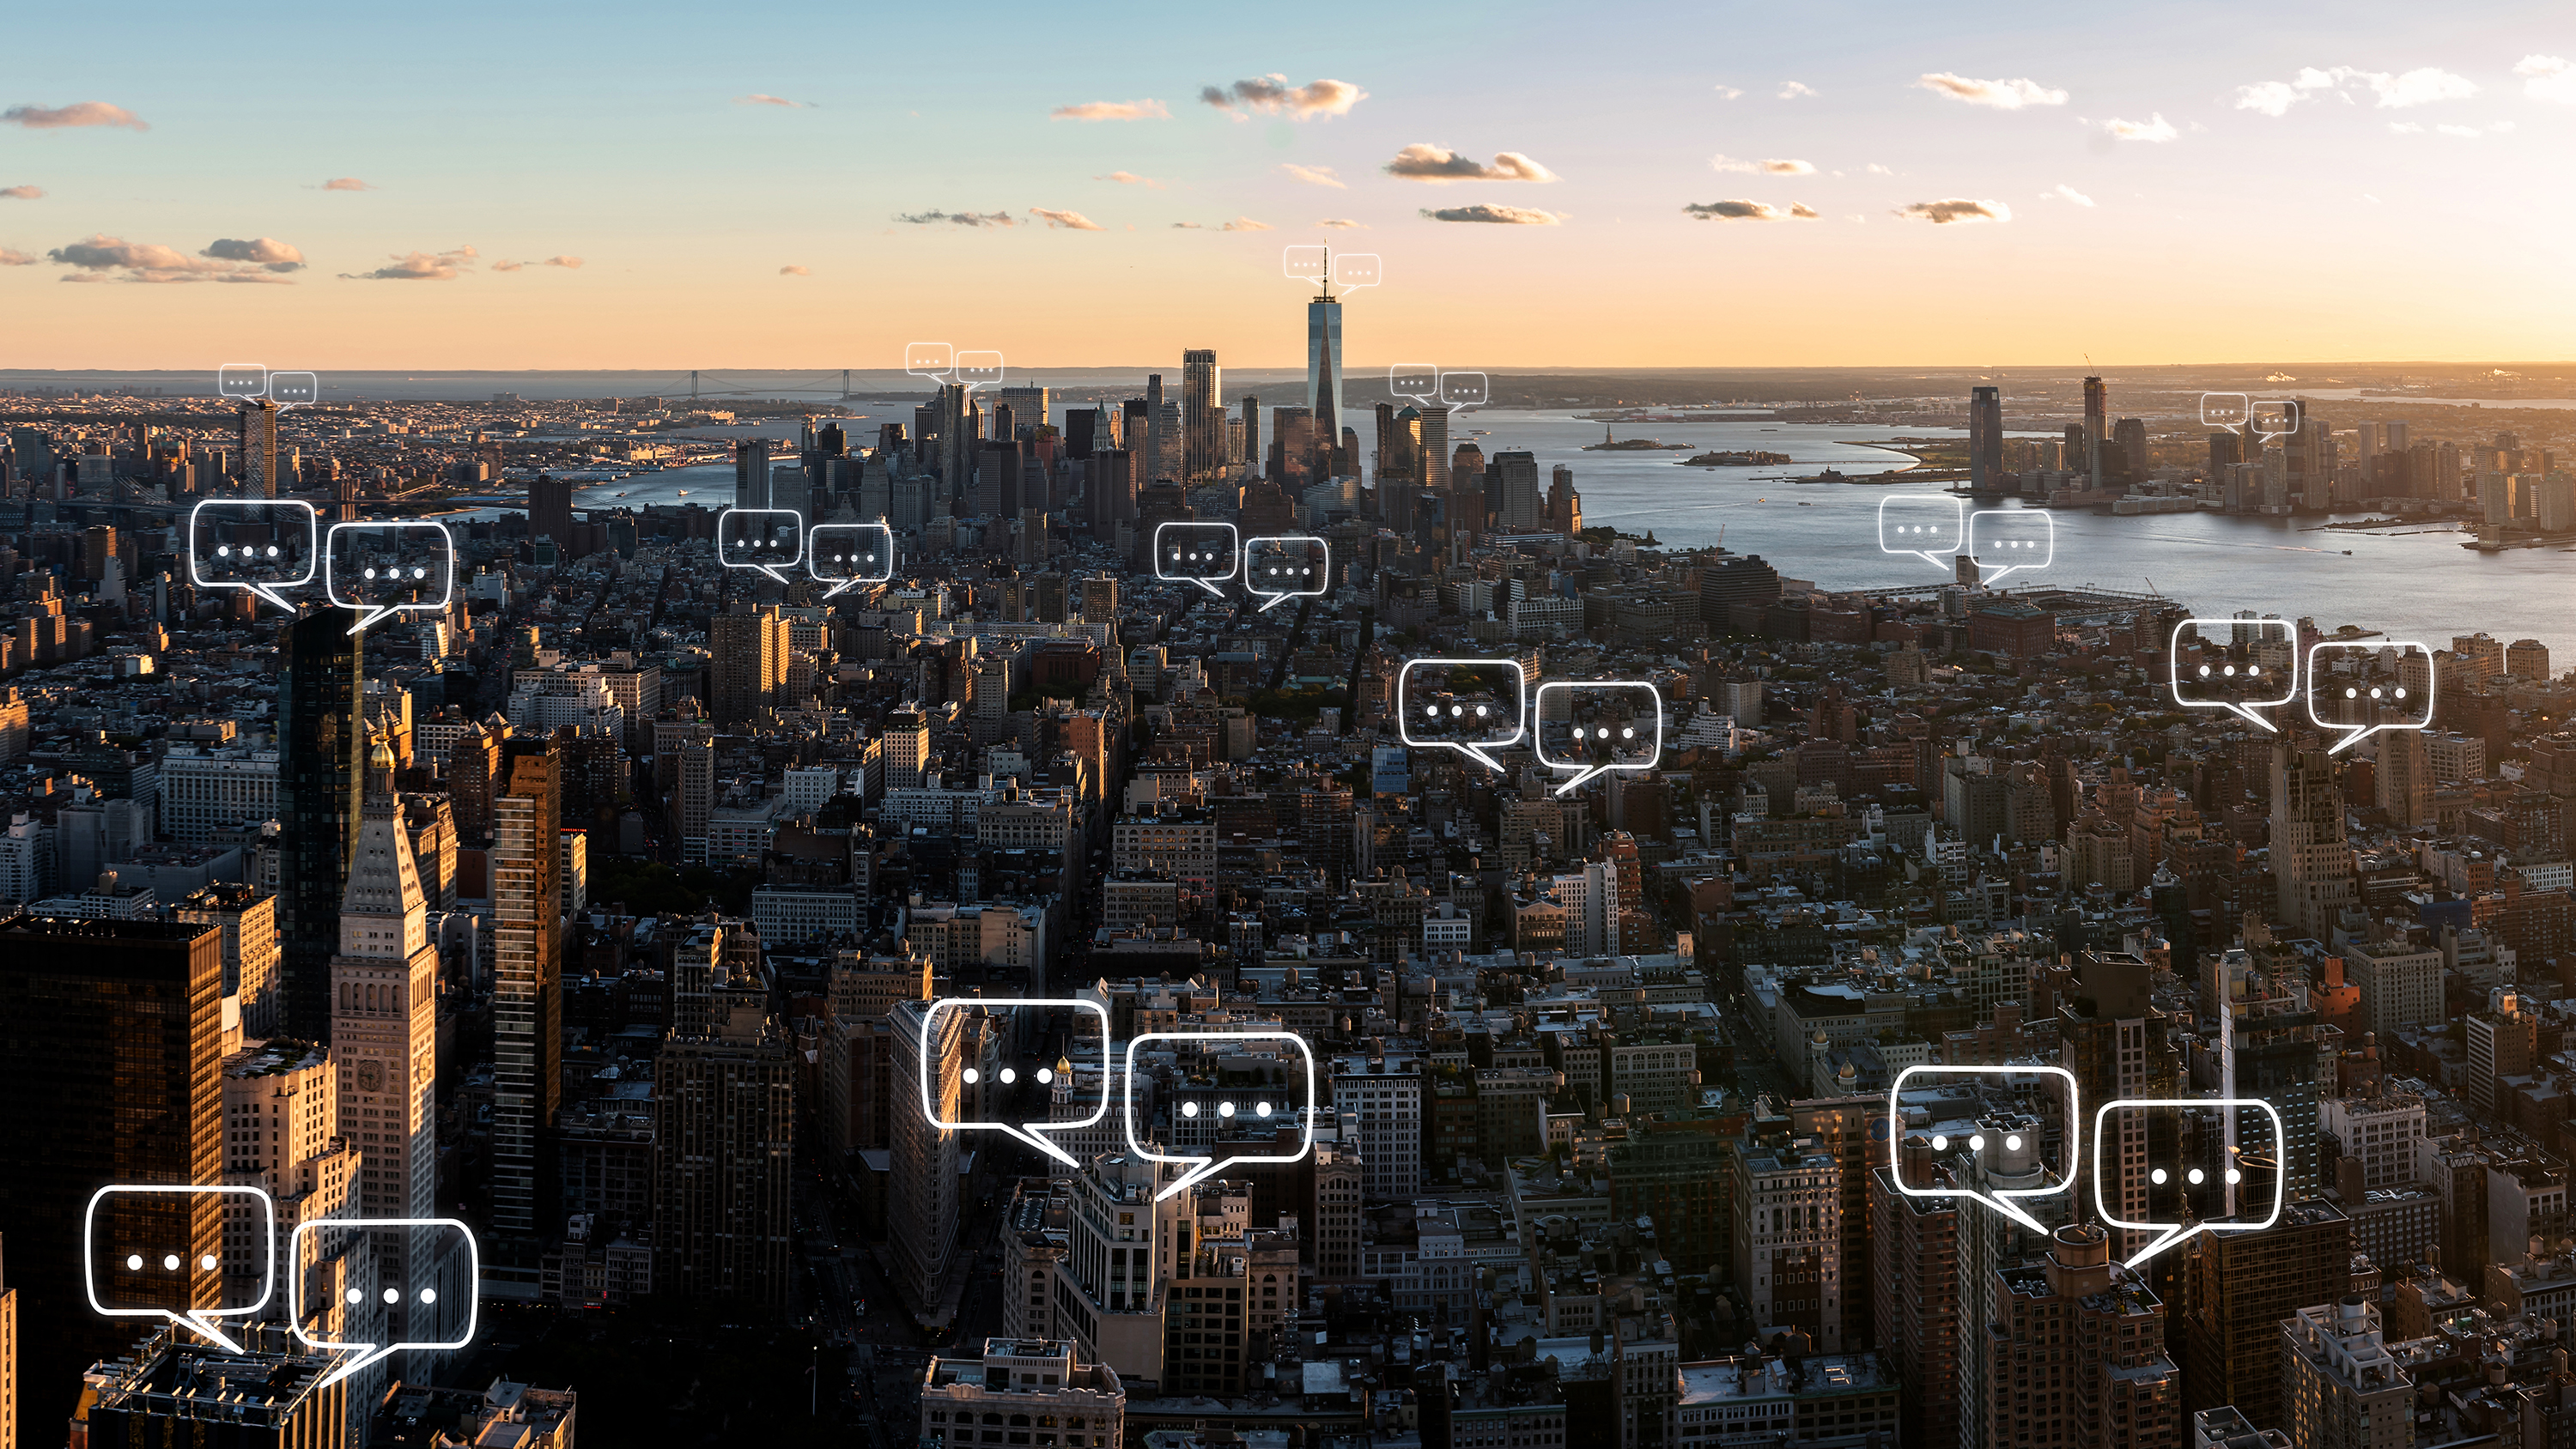 Digital chat bubbles appear across a high view of New York City